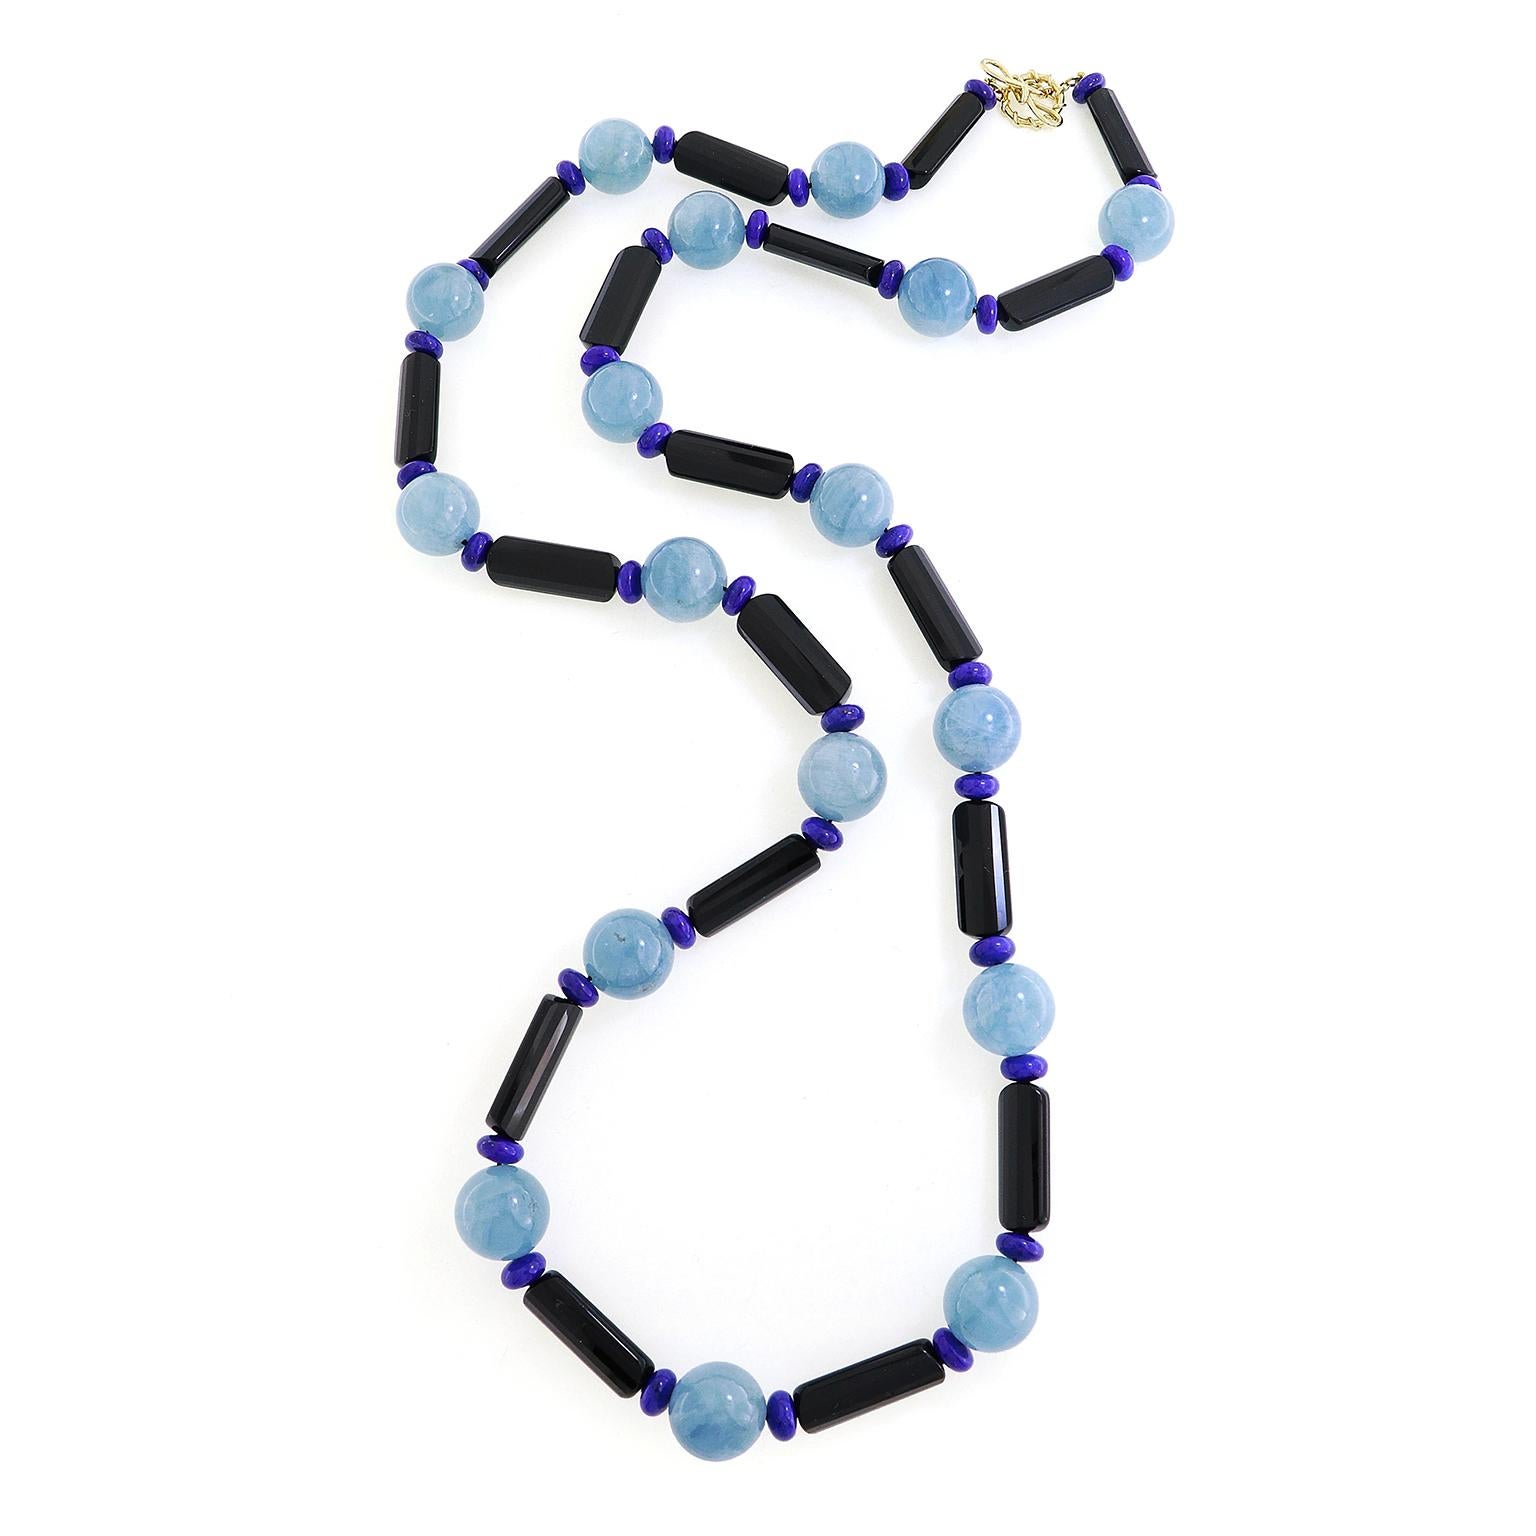 Three gems represent a spectrum of tints for this necklace. Slim black onyx cylinders are combined with lapis lazuli rondelles. In between these are aquamarine orbs. The total weights of the gems are 17 carats of aquamarine, 18 carats of black onyx